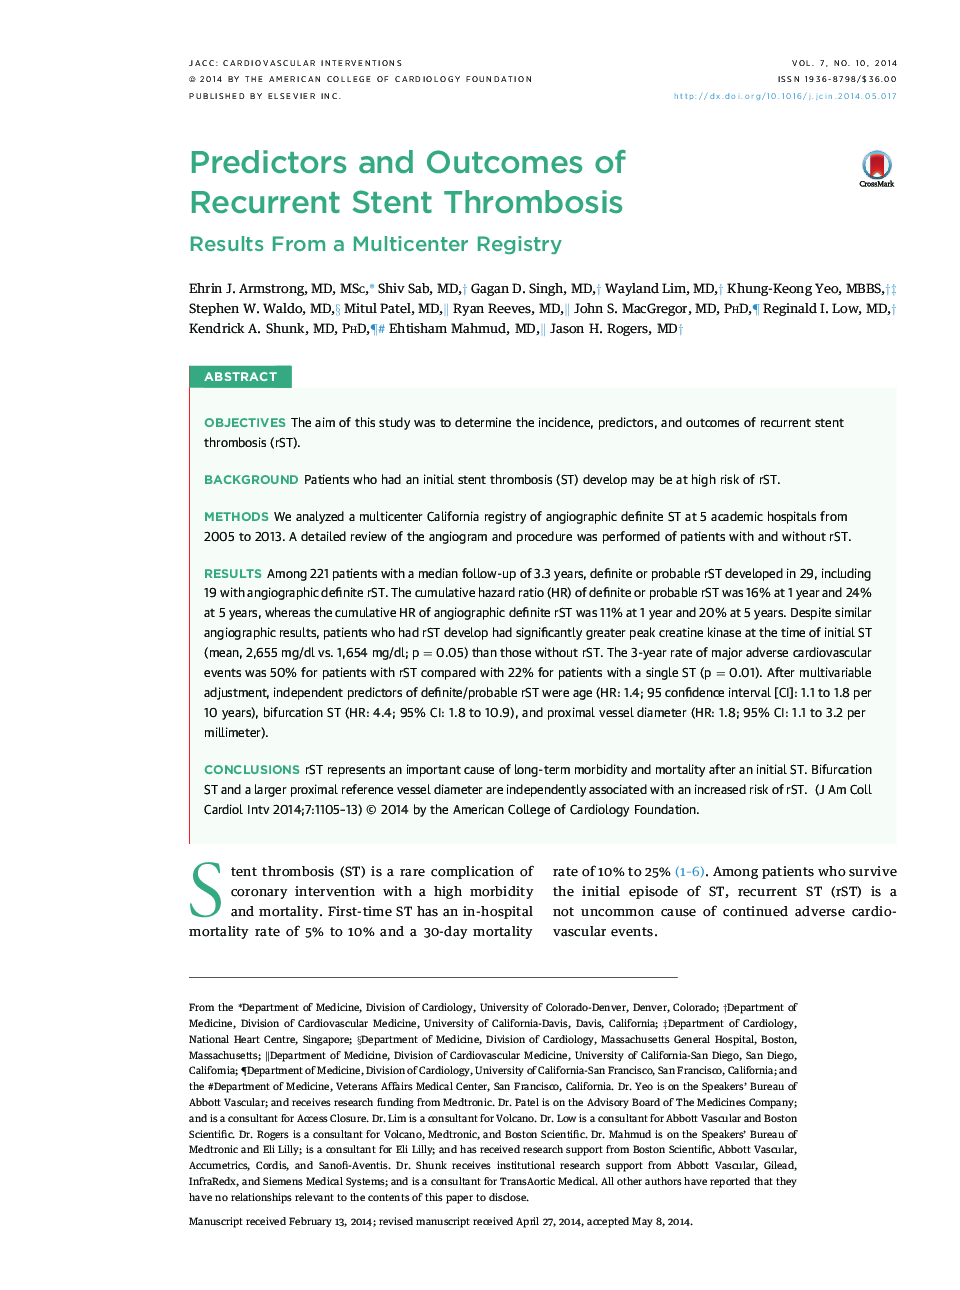 Predictors and Outcomes of Recurrent Stent Thrombosis : Results From a Multicenter Registry